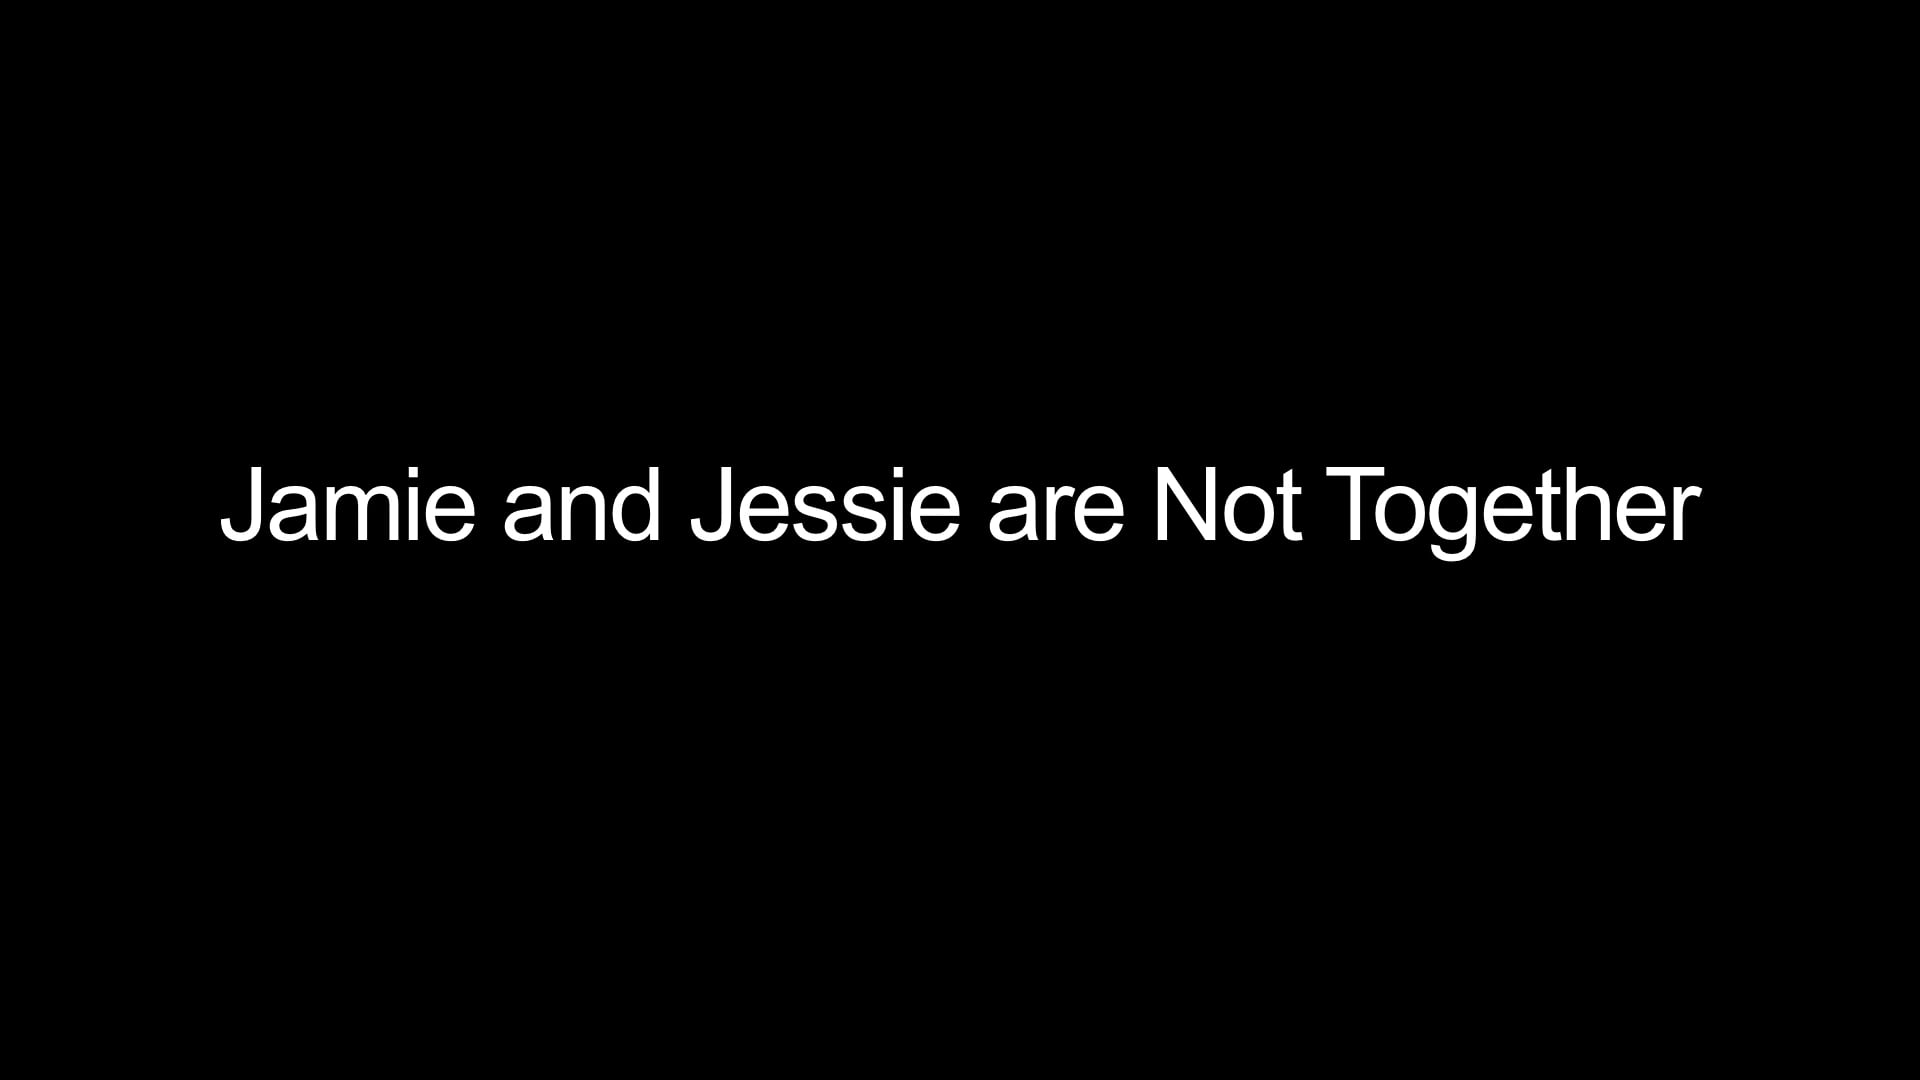 Watch Jamie and Jessie Are Not Together Online Vimeo On Demand on Vimeo